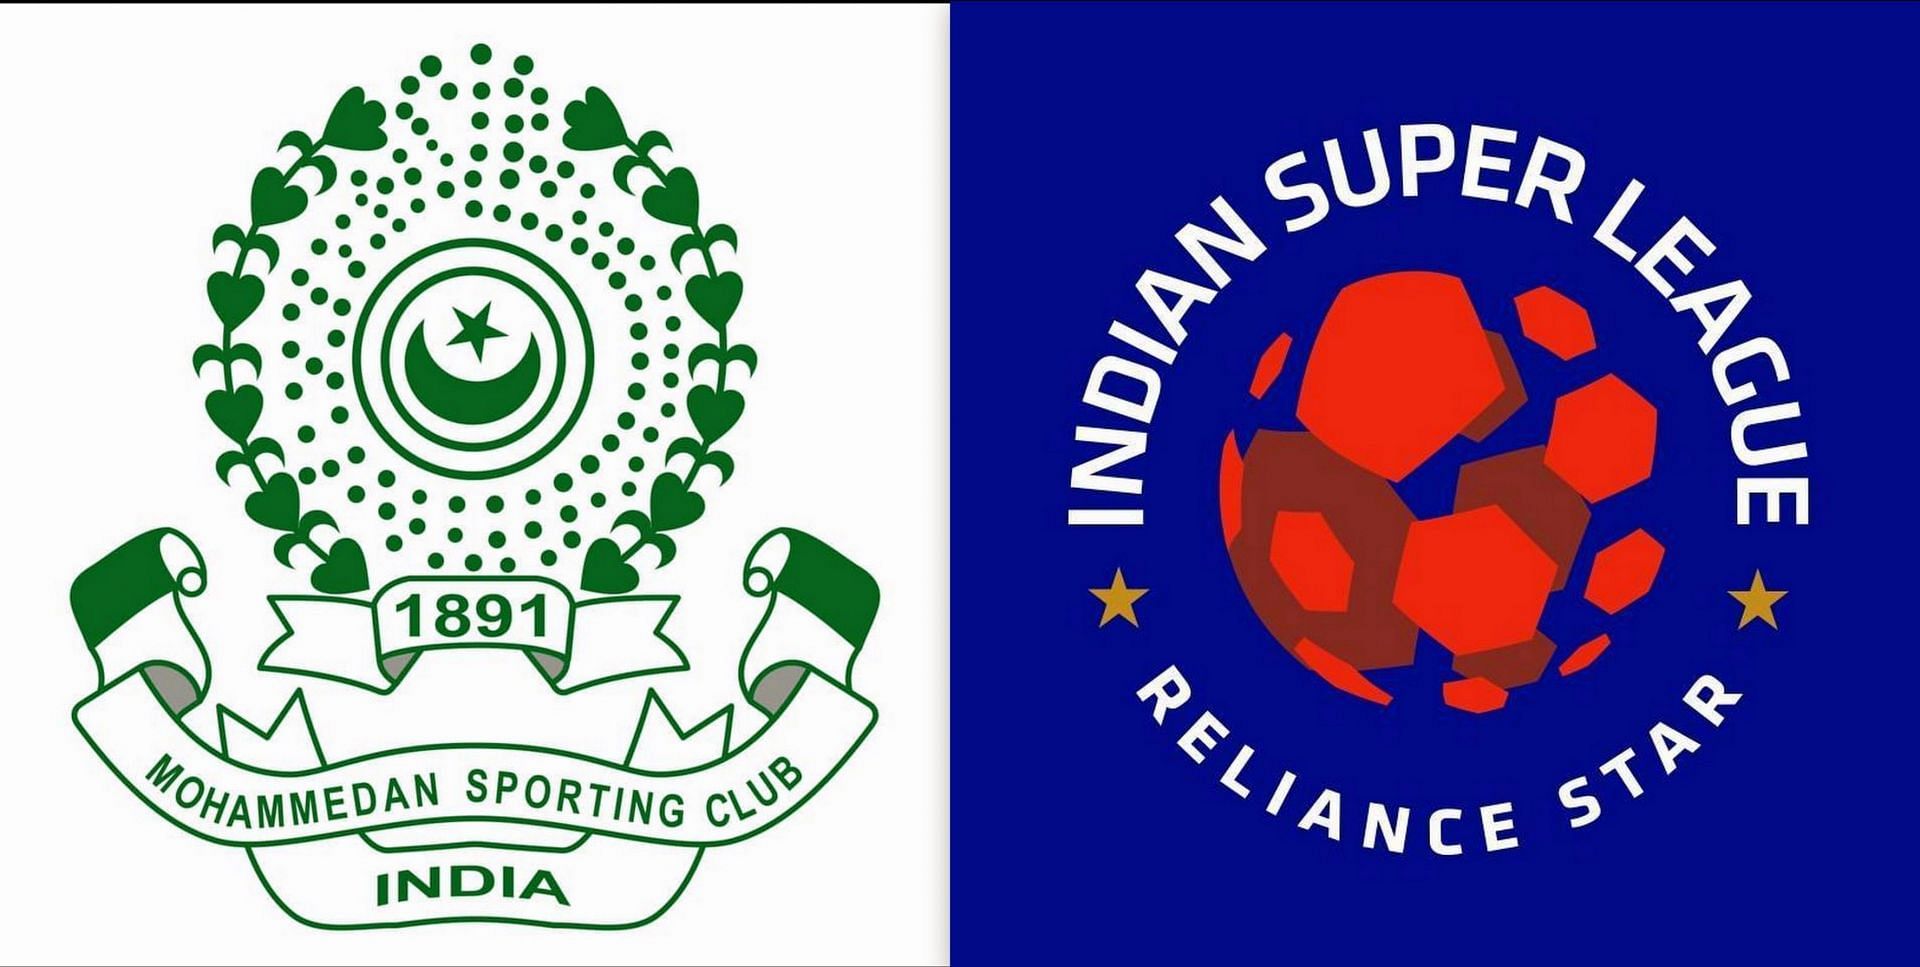 Mohammedan Sporting Club want to create a core group of players before entering the ISL (Image Courtesy: MSC, ISL)